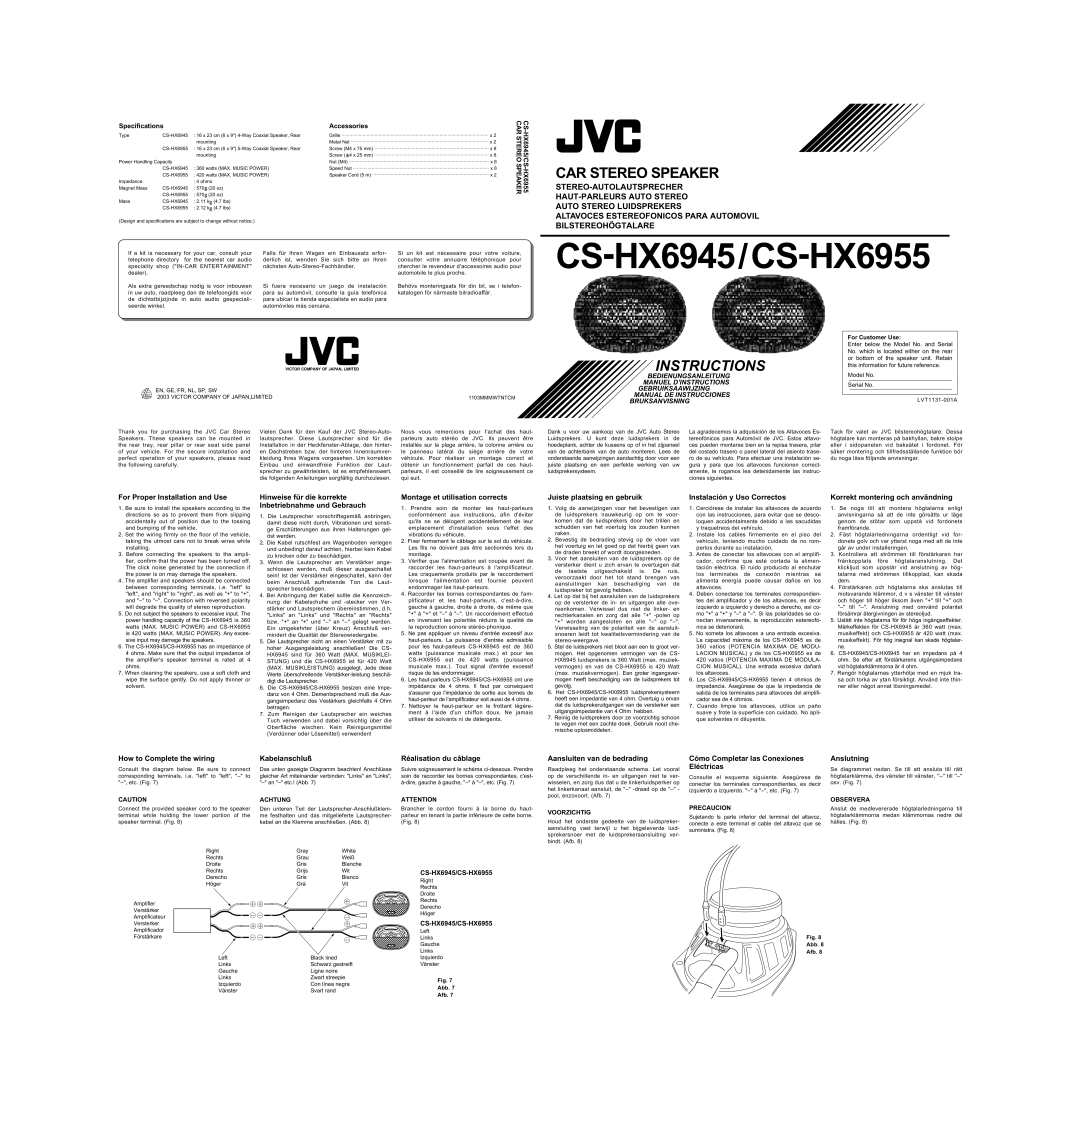 JVC CS-HX6945 specifications Stereo-Autolautsprecher Haut-Parleurs Auto Stereo, Auto Stereo Luidsprekers, Instructions 